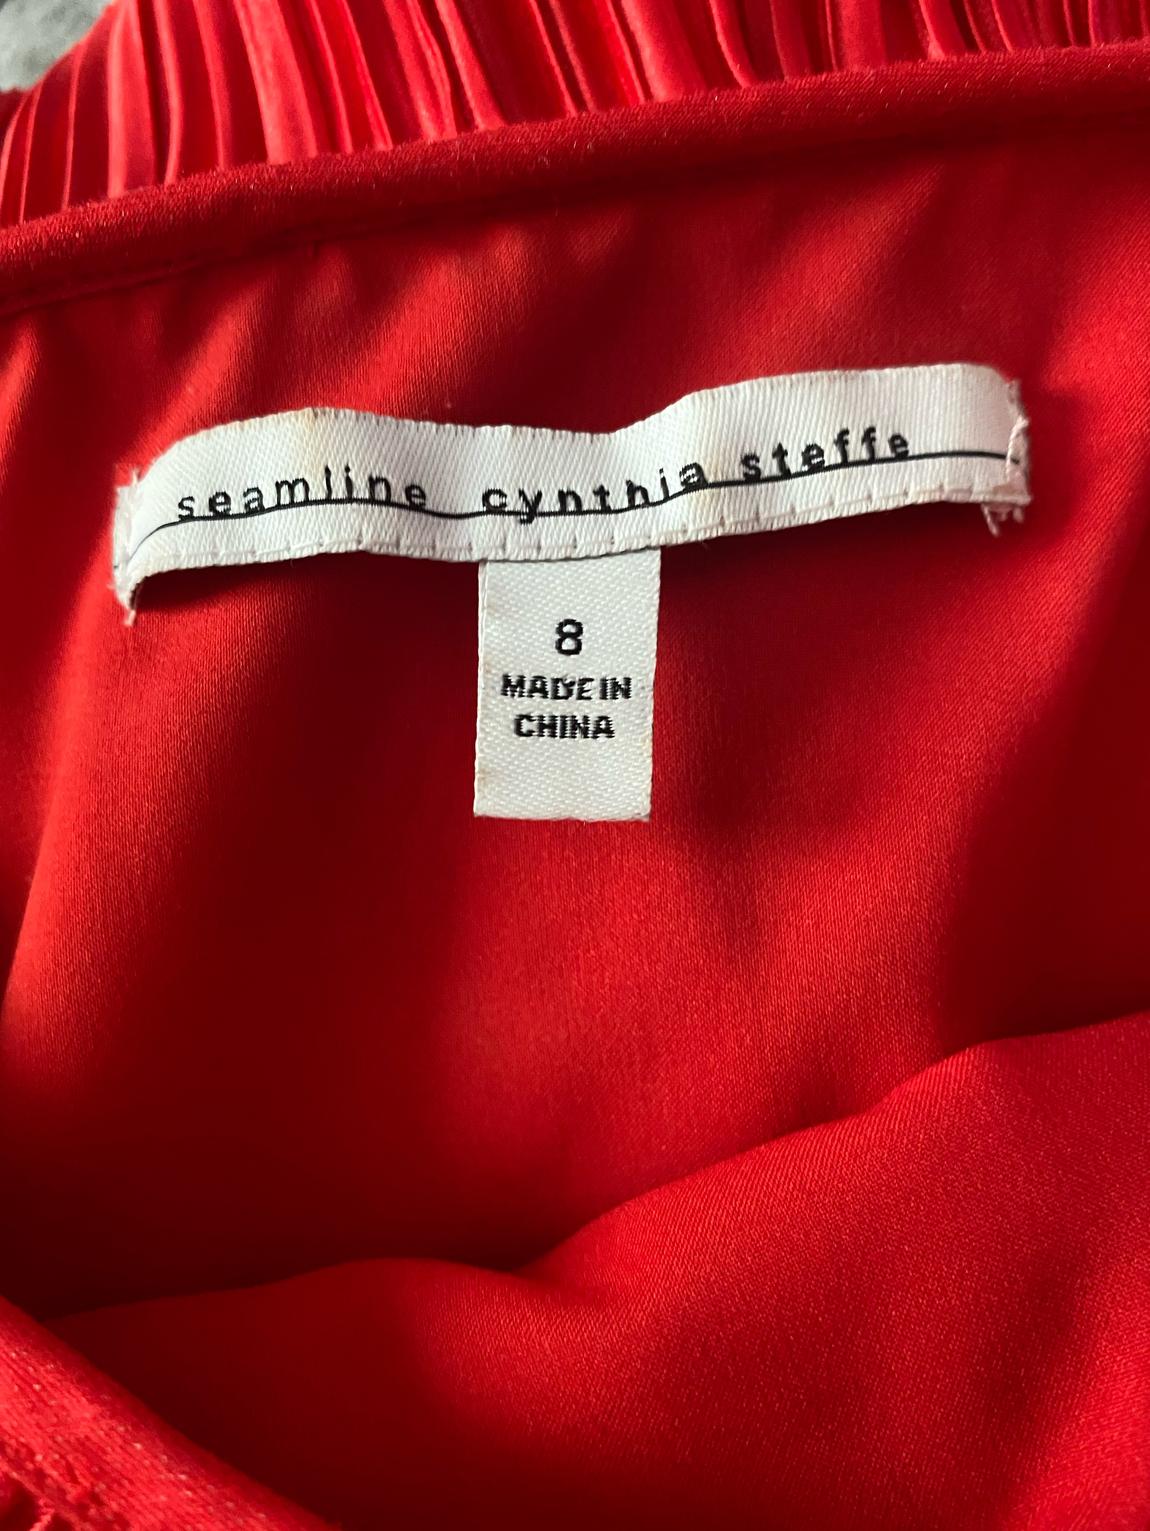 Cynthia steffe Size 8 Red A-line Dress on Queenly